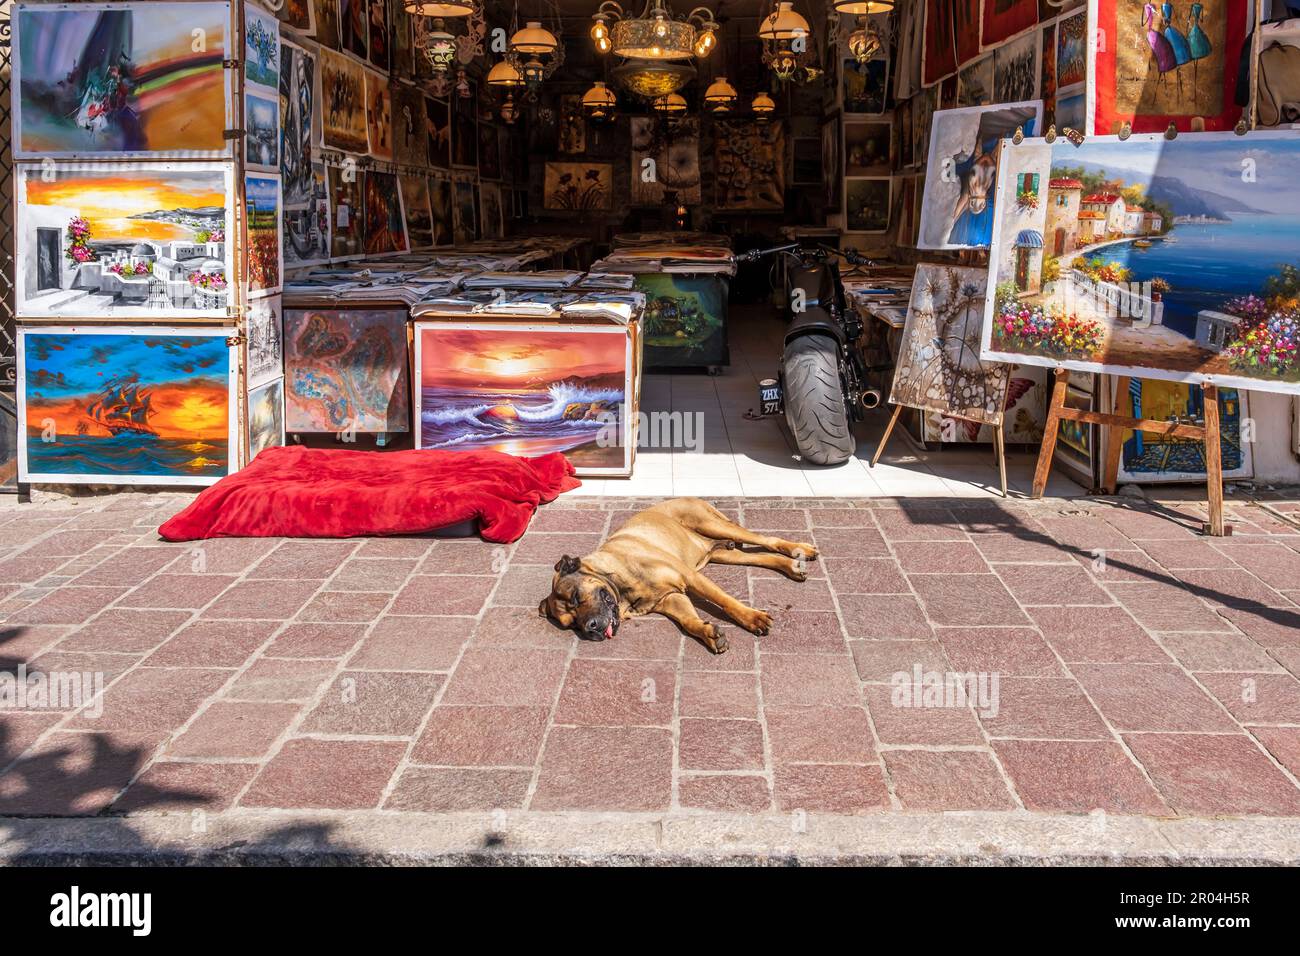 Sleeping dog in front of art shop in the old town of Rethymno, Crete, Greece Stock Photo